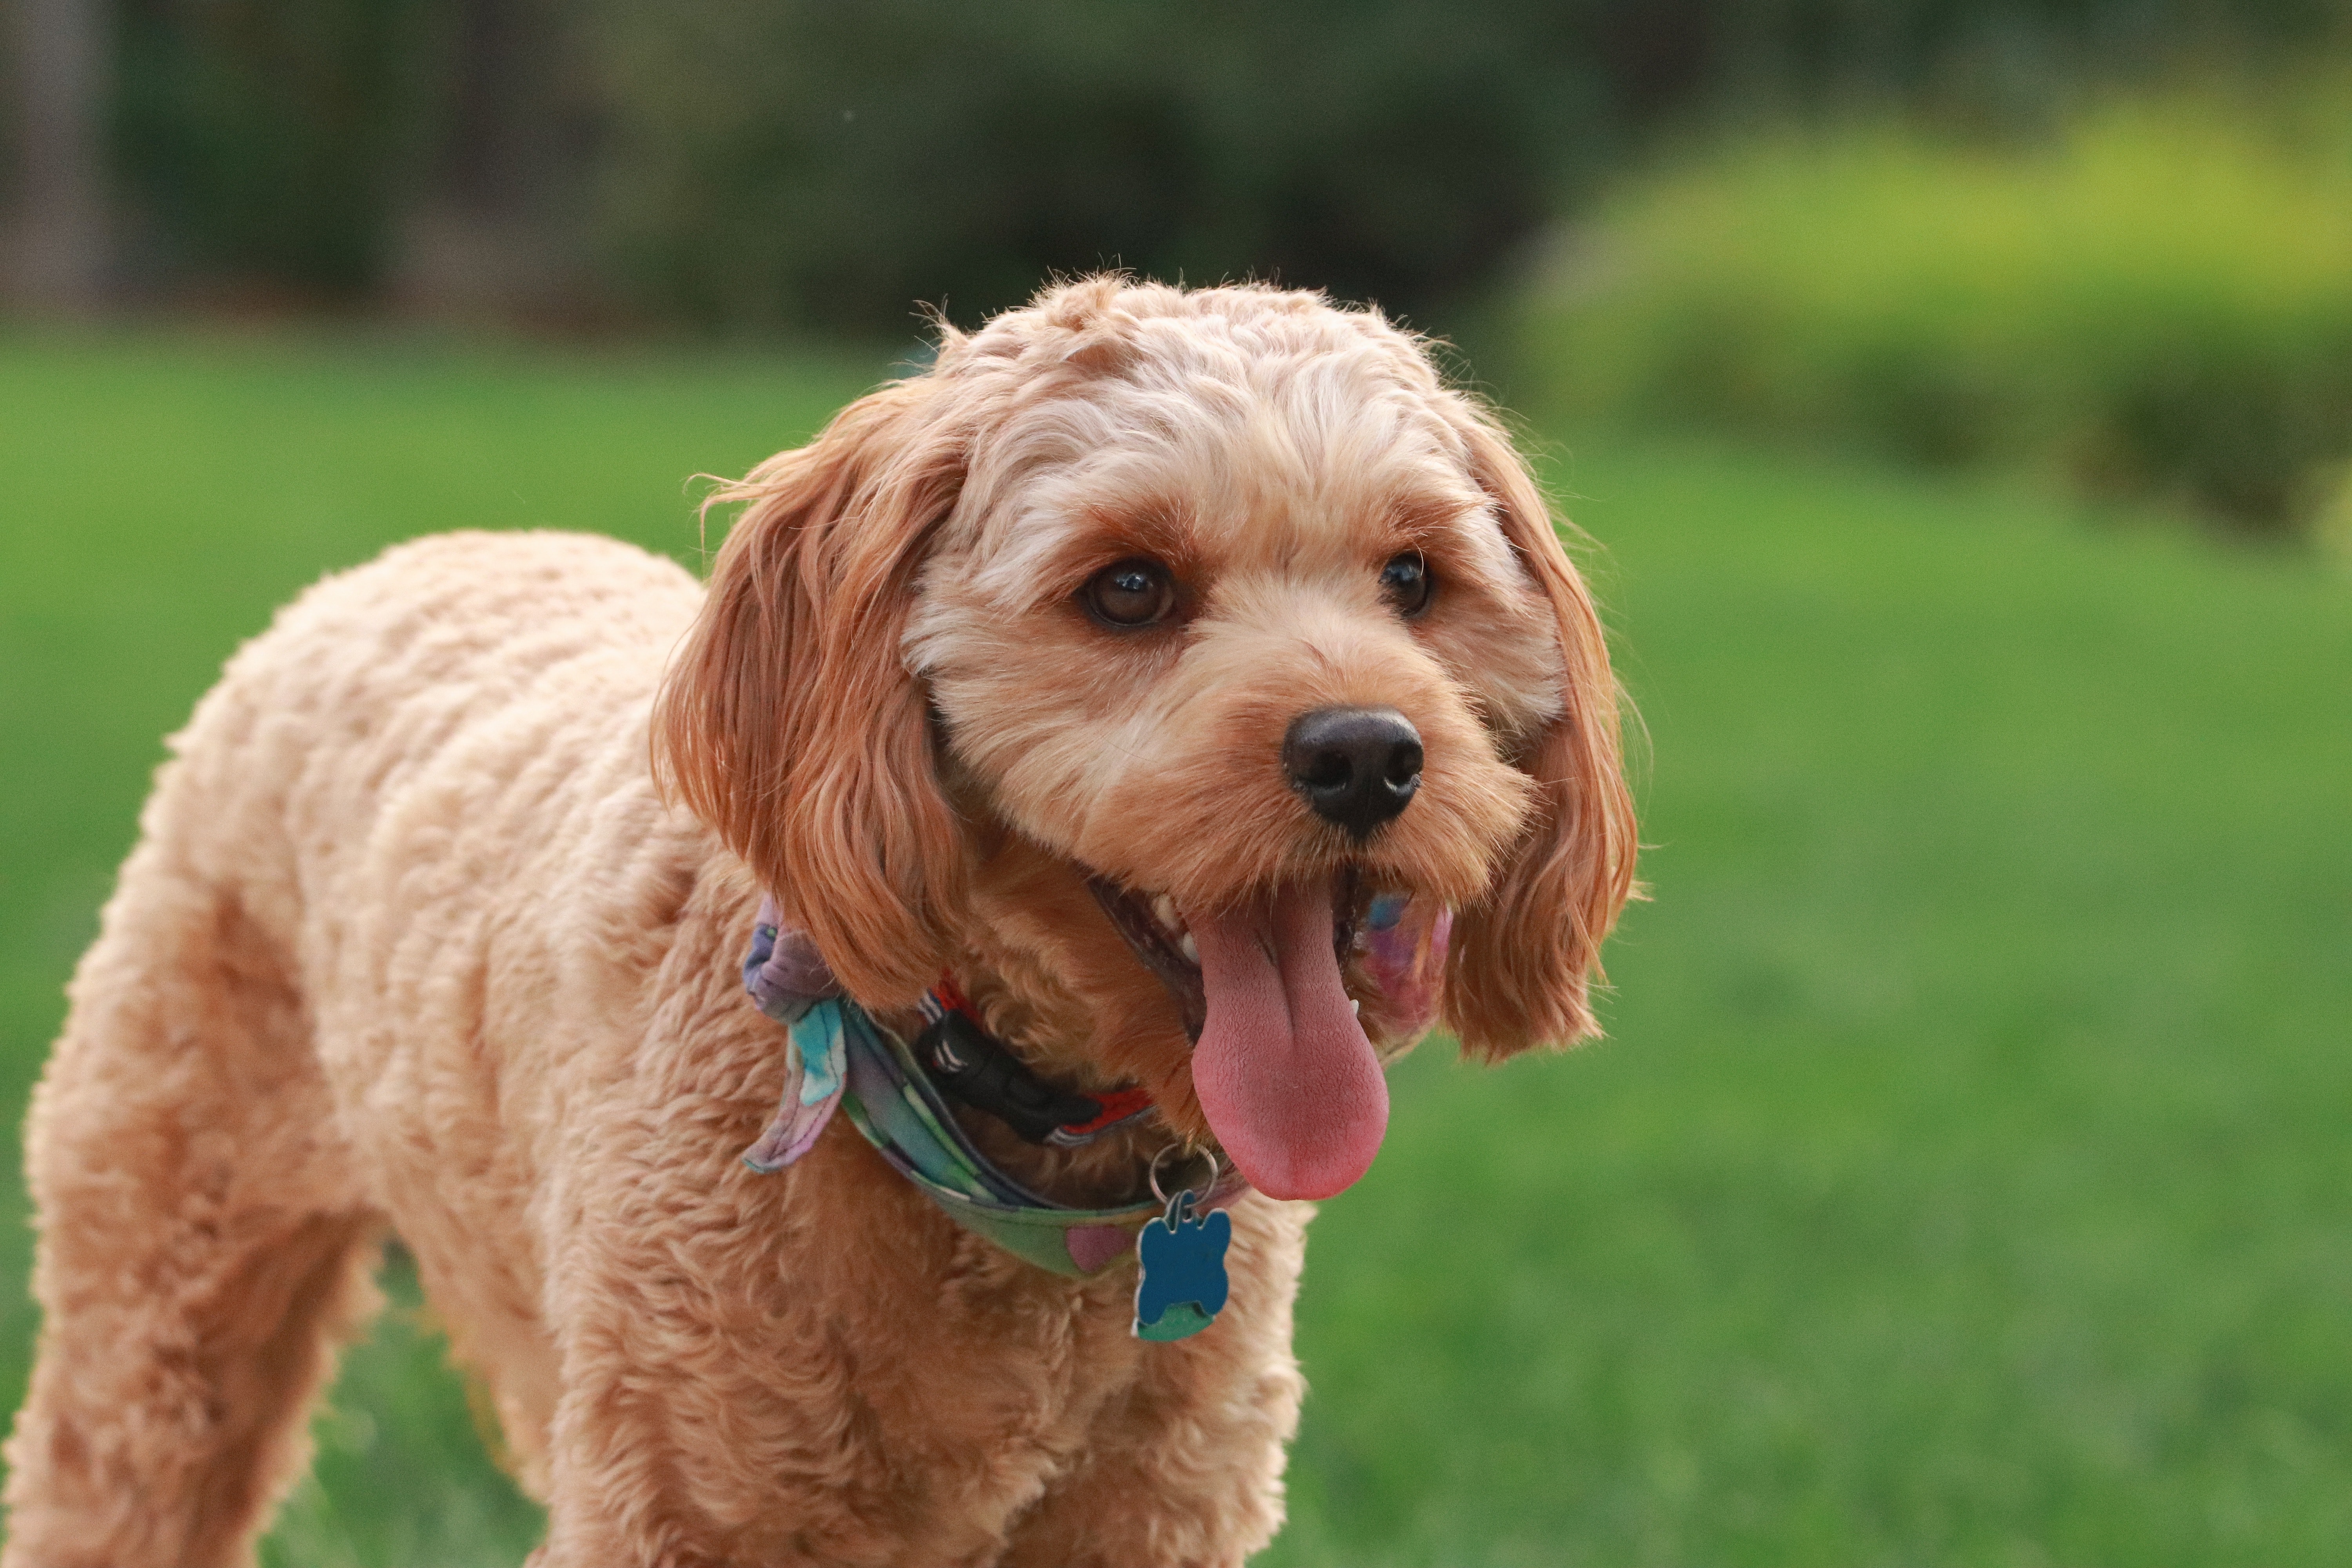 brown cavapoo dog on grass with its tongue out